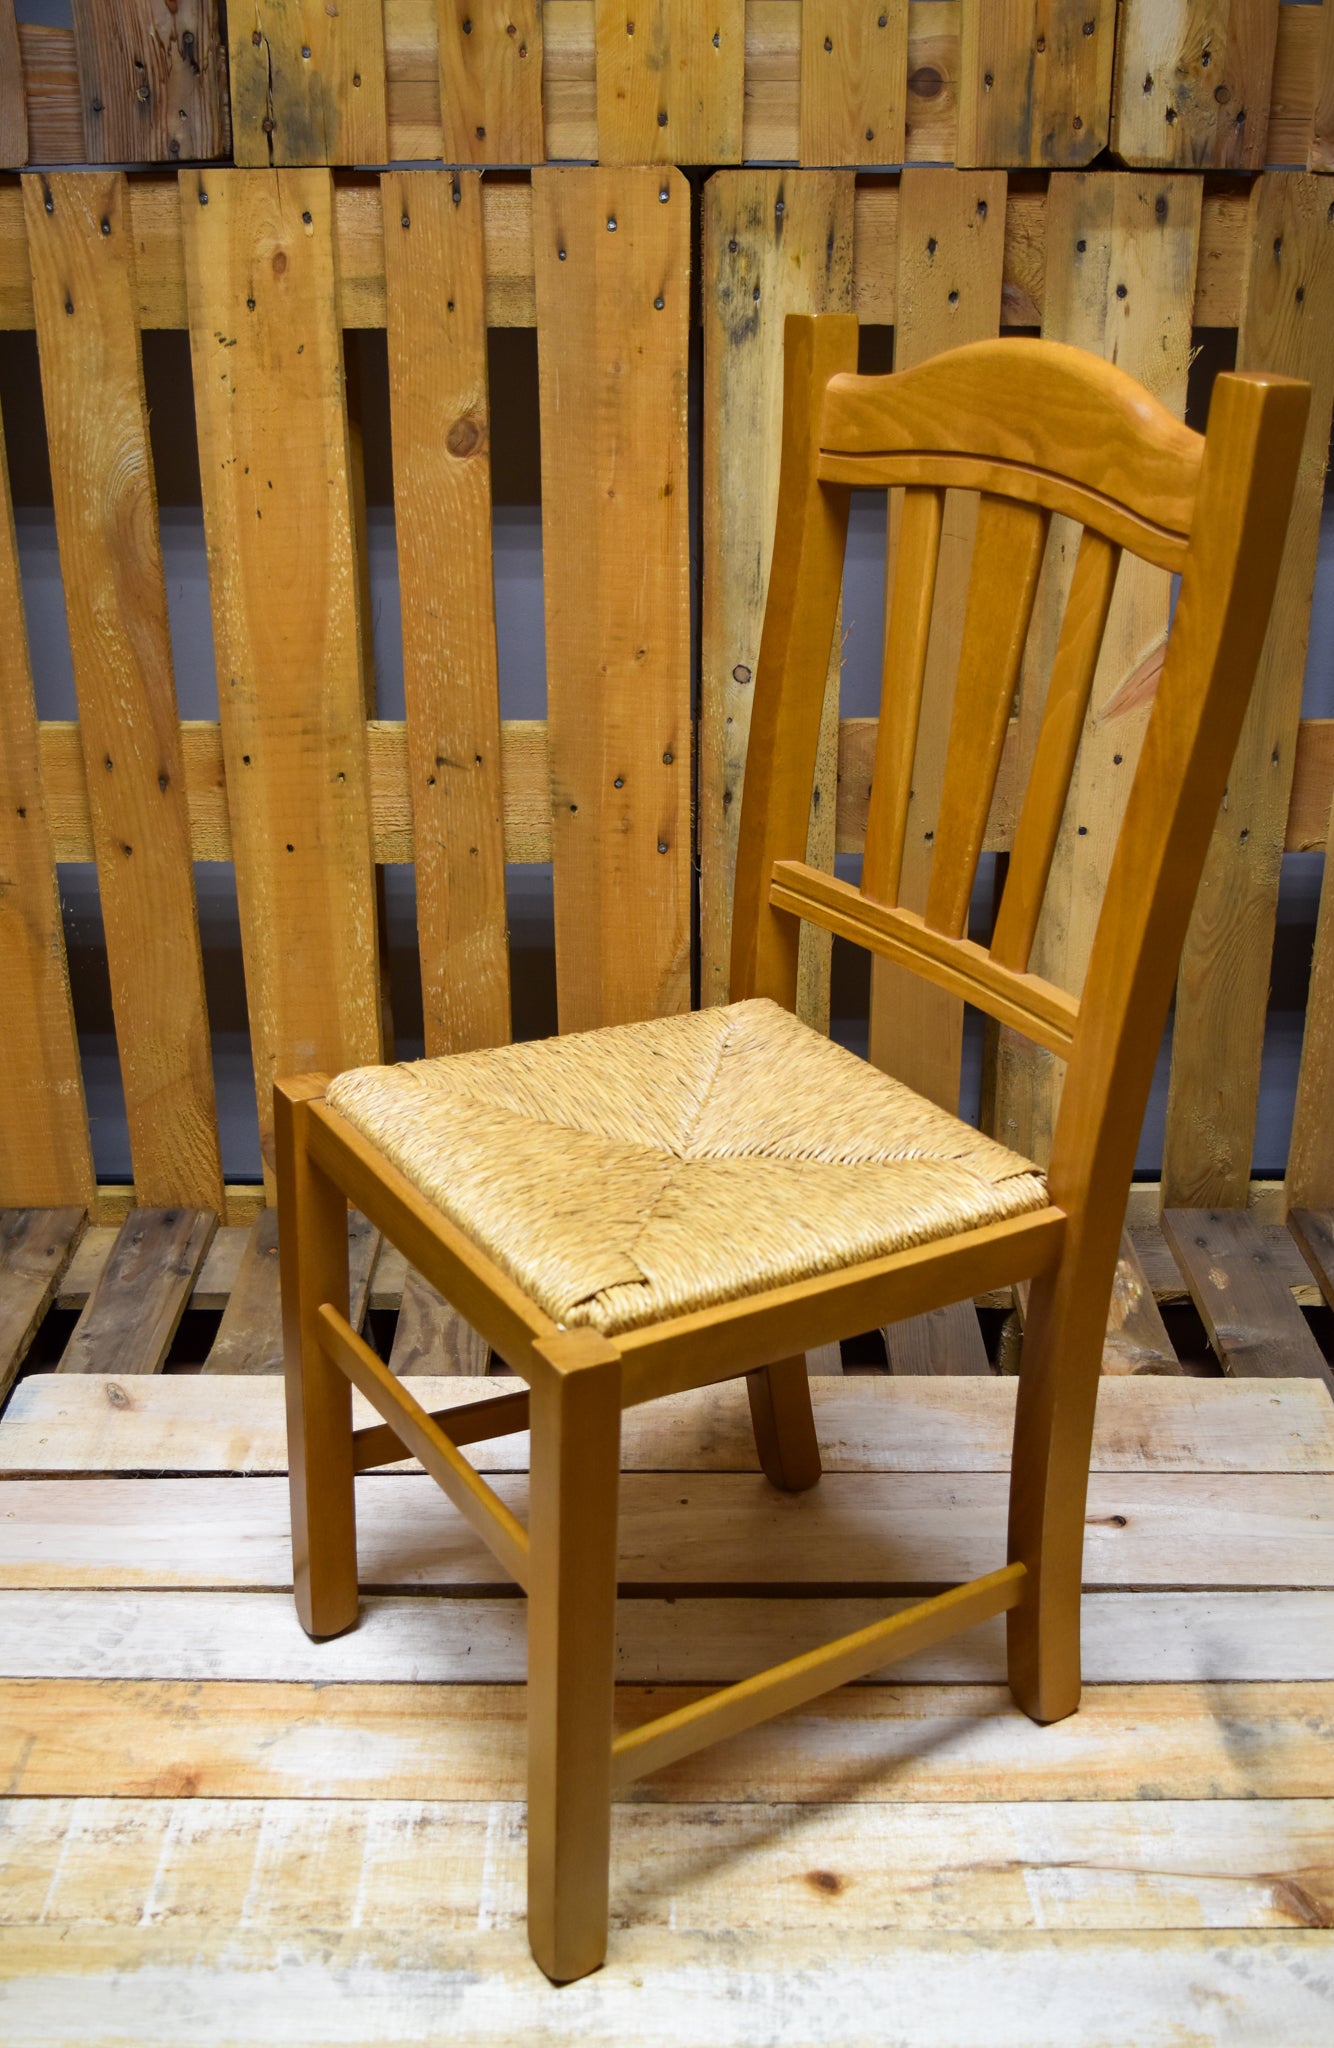 Stock chairs model 21 in oak colour, straw seat without defects